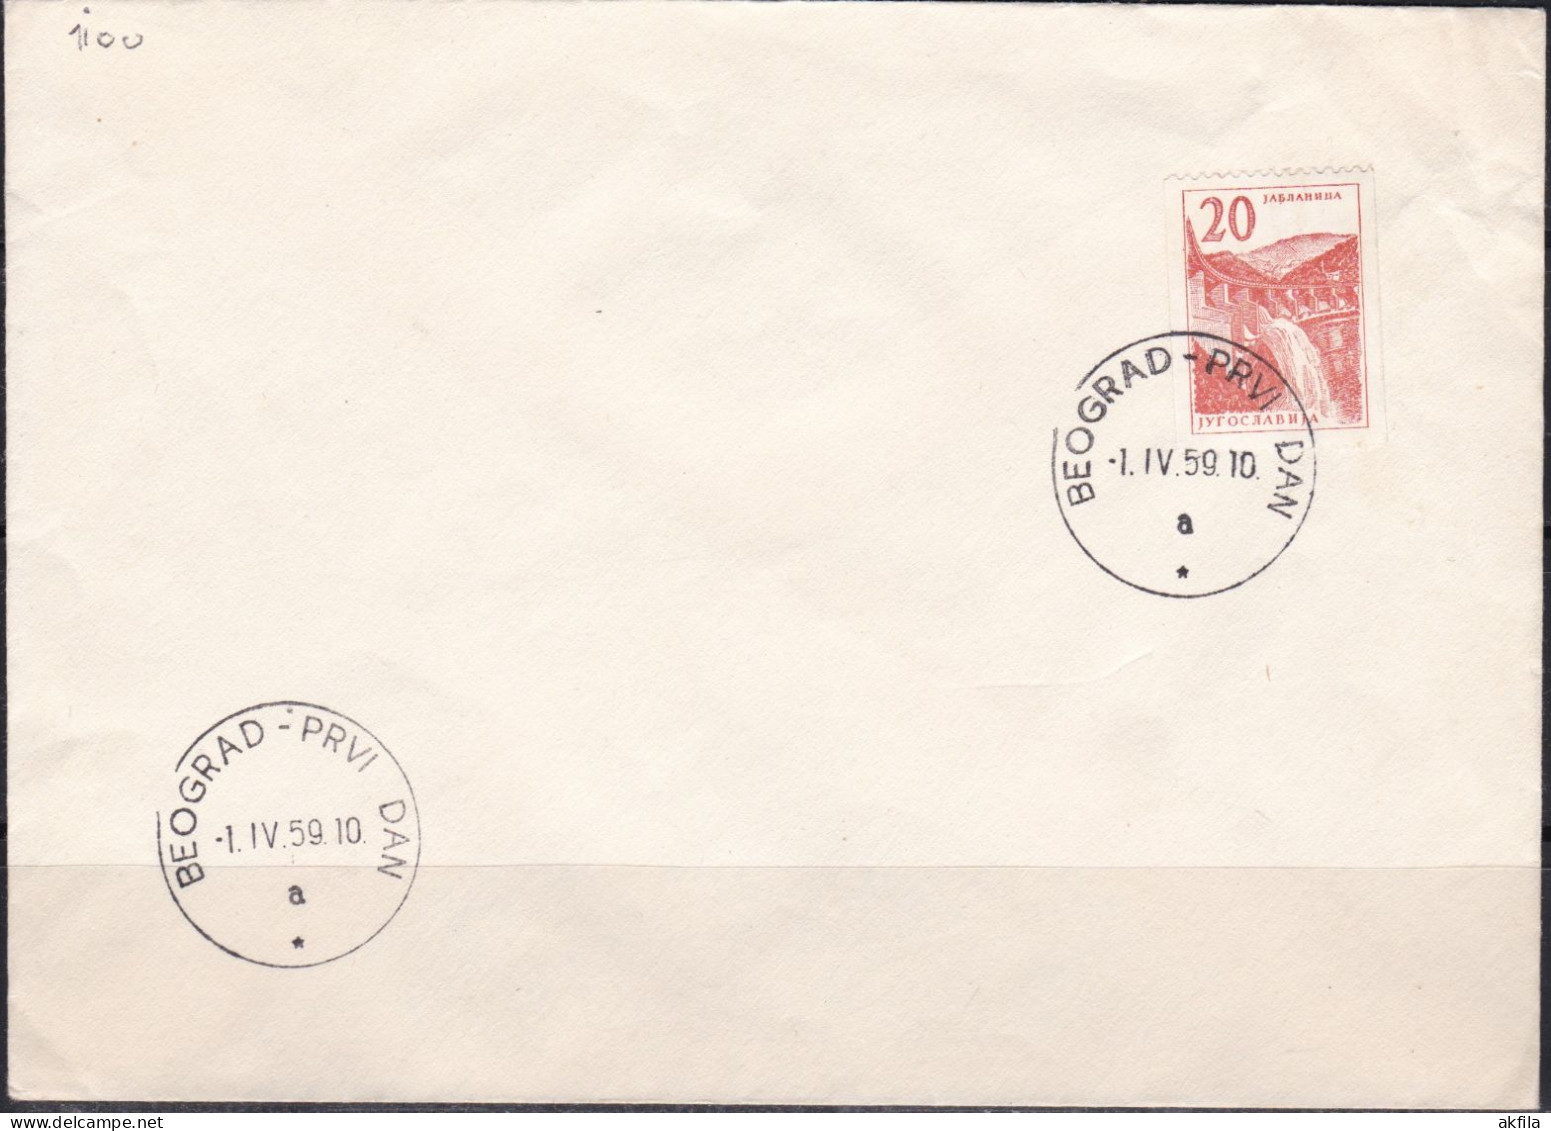 Yugoslavia 1959 Stamp For Vending Machines FDC - FDC